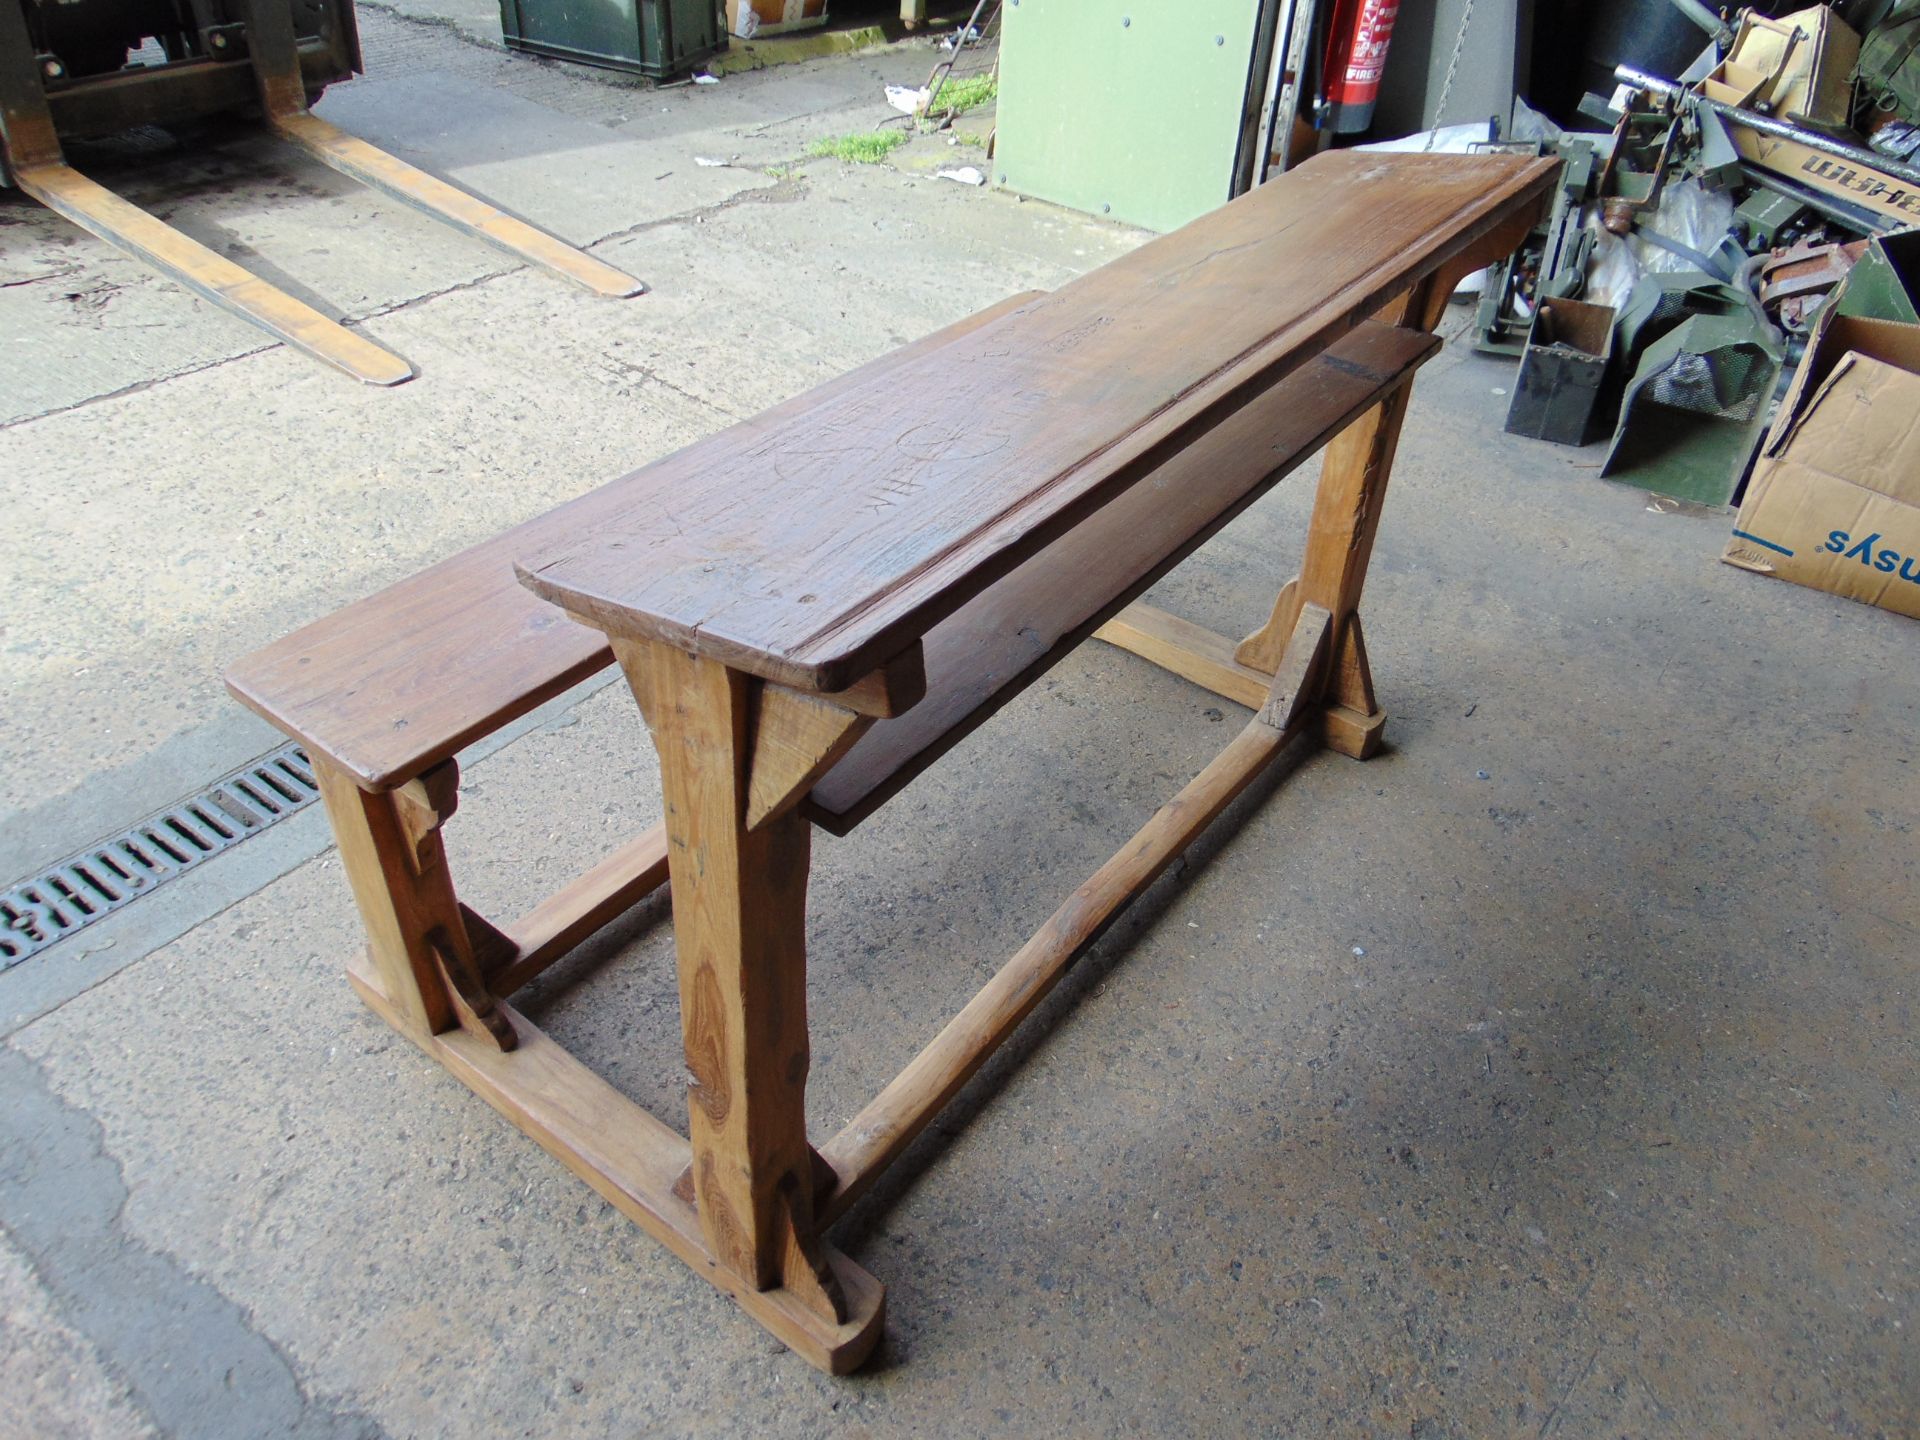 Antique Traditional Wooden School Bench Desk - Image 6 of 7